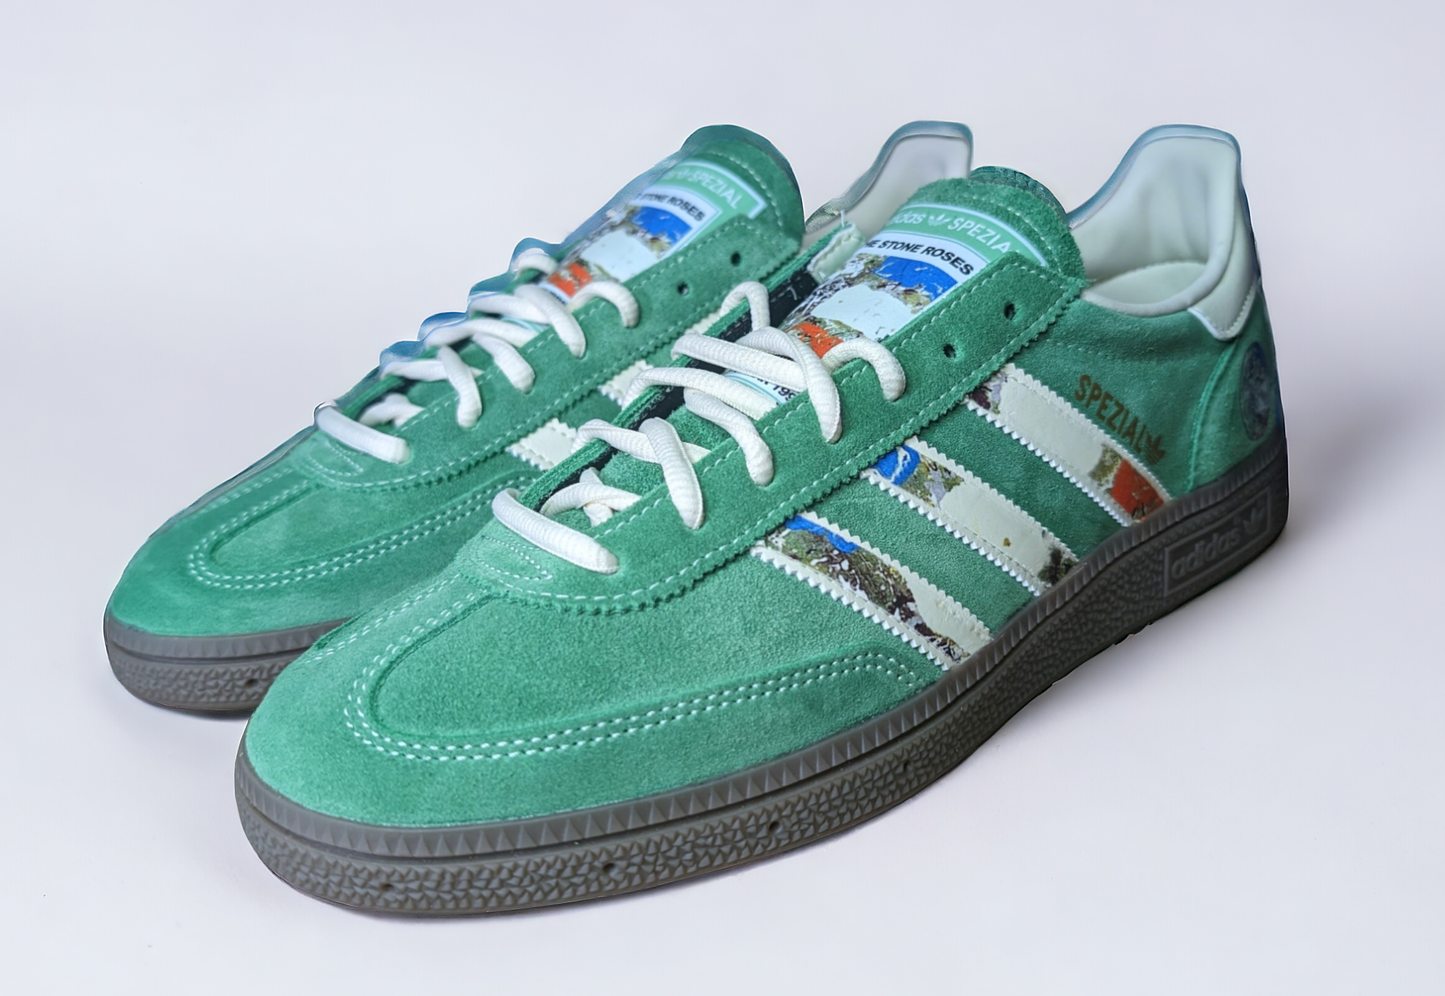 Limited edition The Stone Roses I am the resurrection adidas original Green / white Handball Spezial custom trainers / sneakers